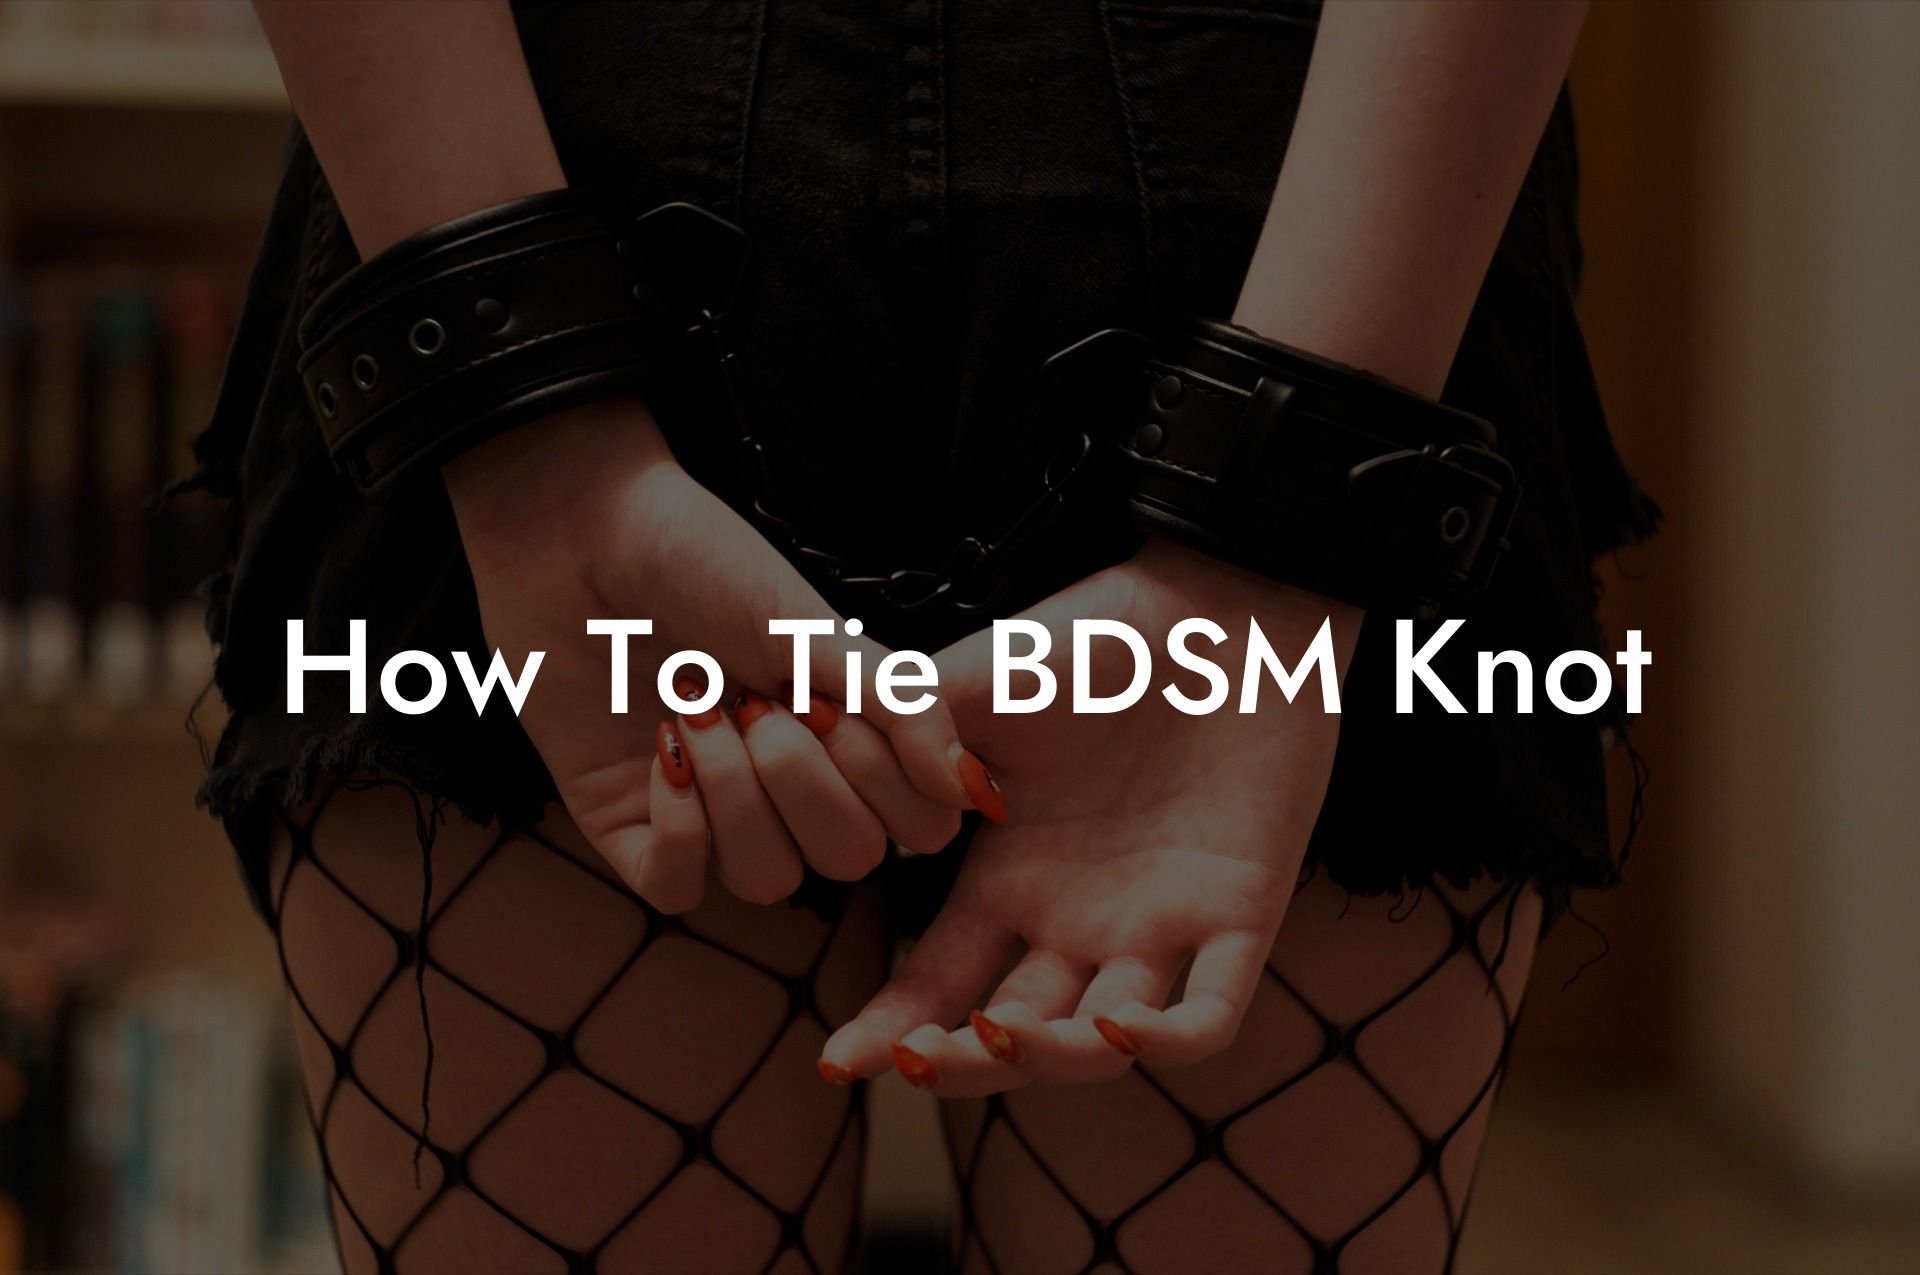 How To Tie BDSM Knot